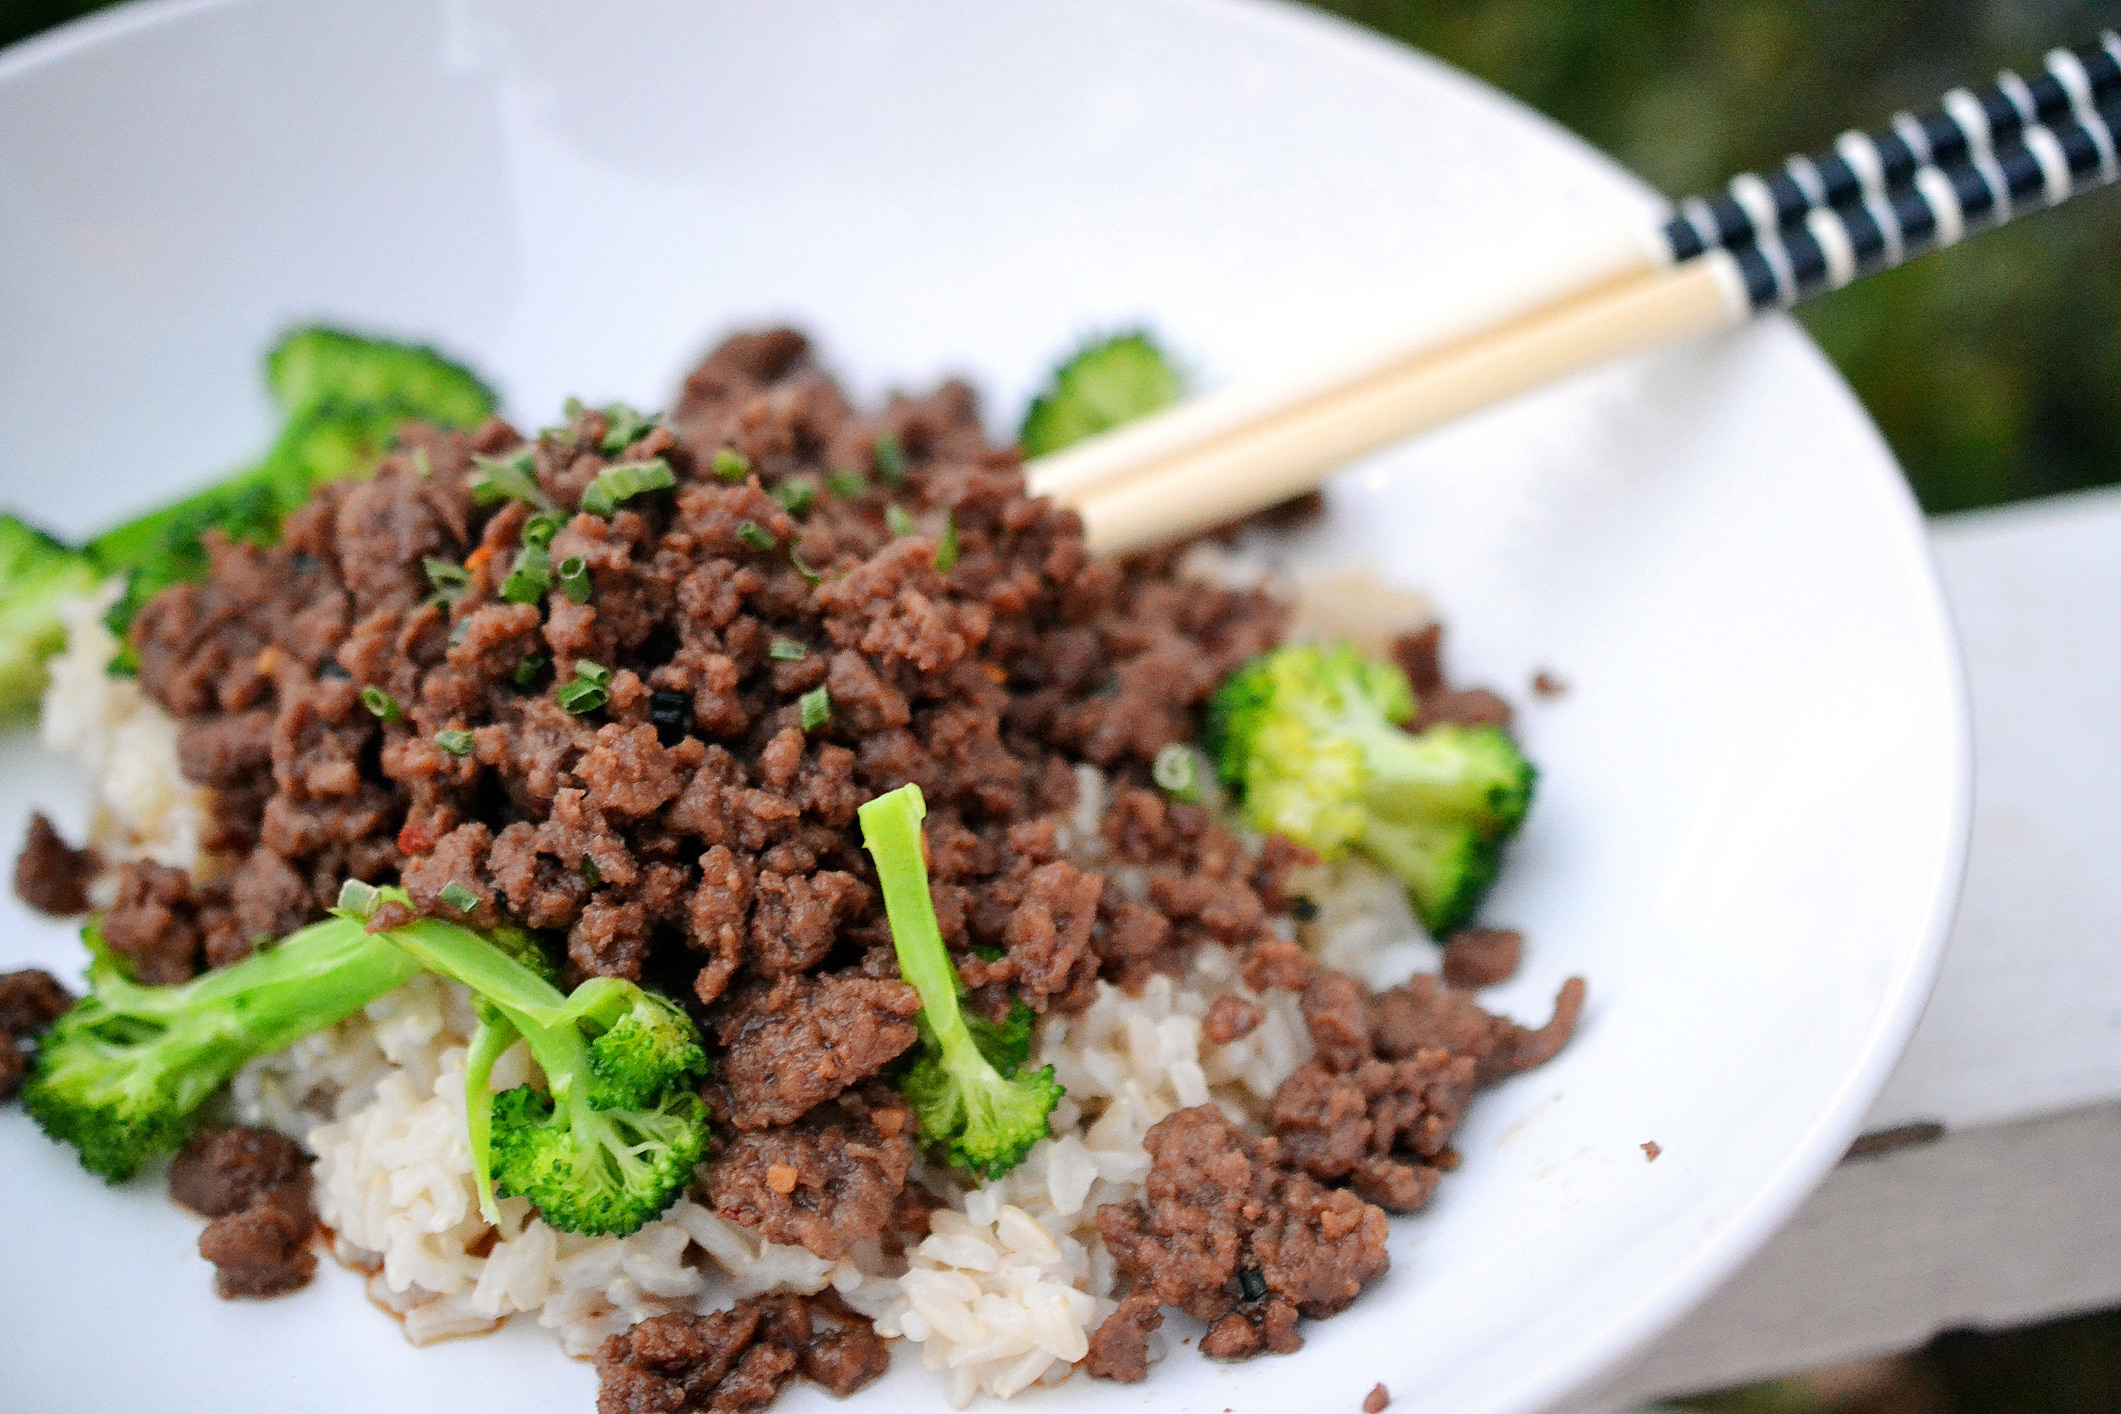 Beef, Broccoli and Brown Gravy With Rice